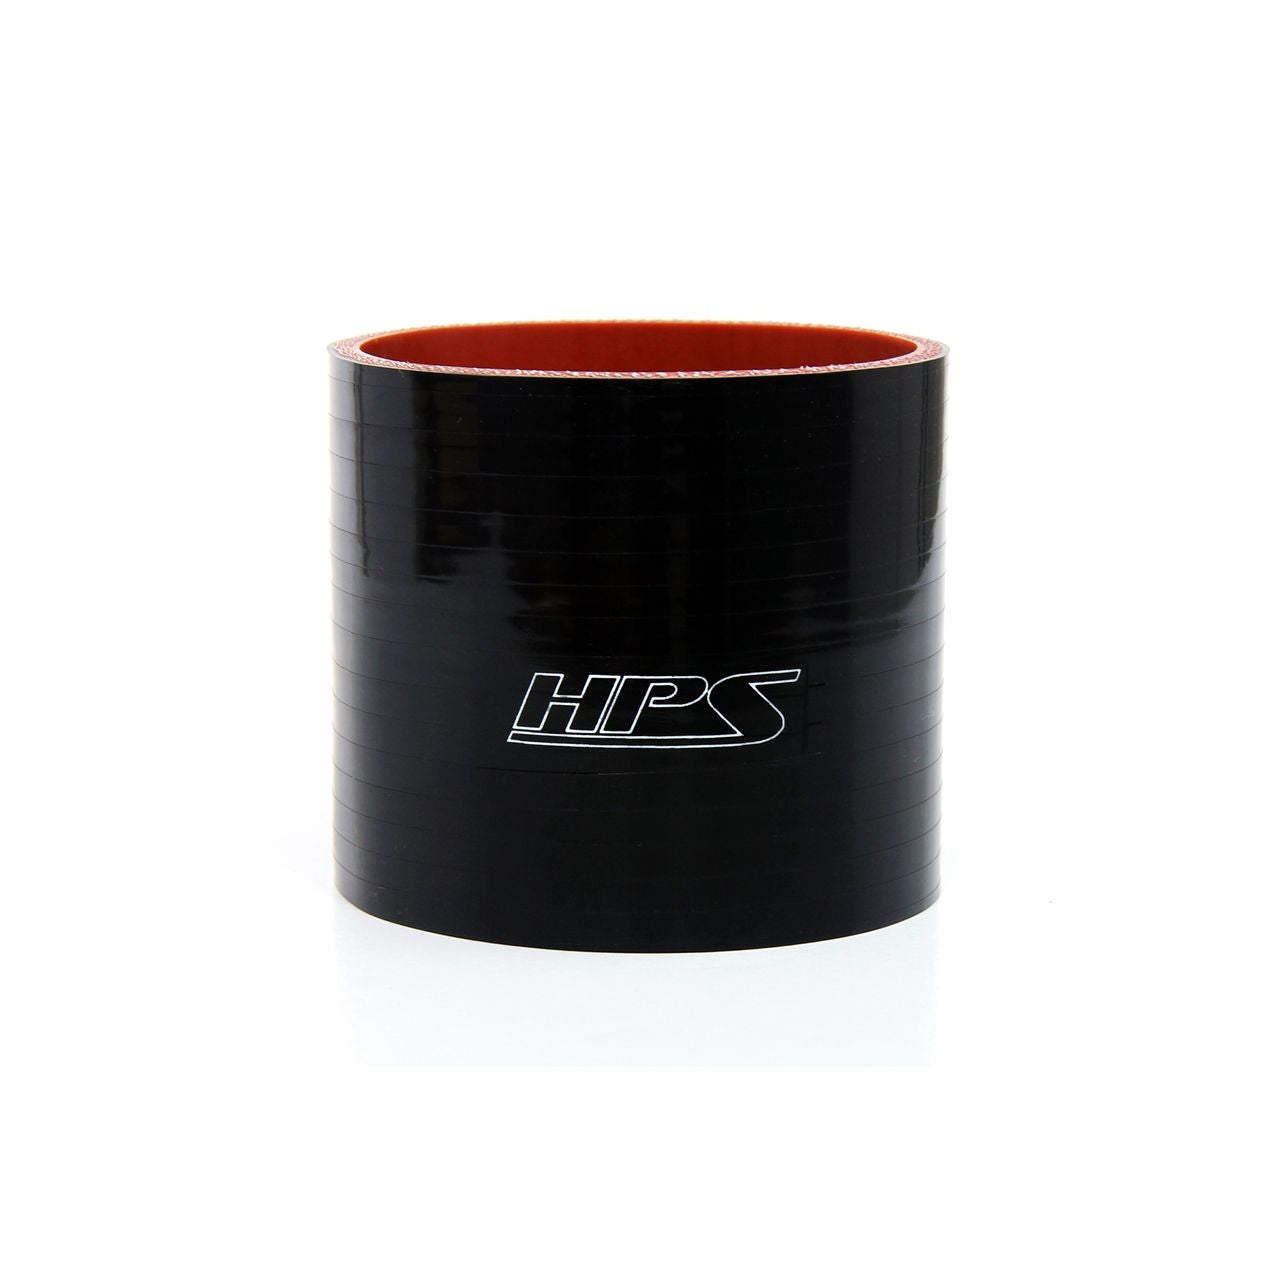 HPS 1-1/8" ID , 3" Long High Temp 4-ply Reinforced Silicone Straight Coupler Hose Black (28mm ID , 76mm Length)